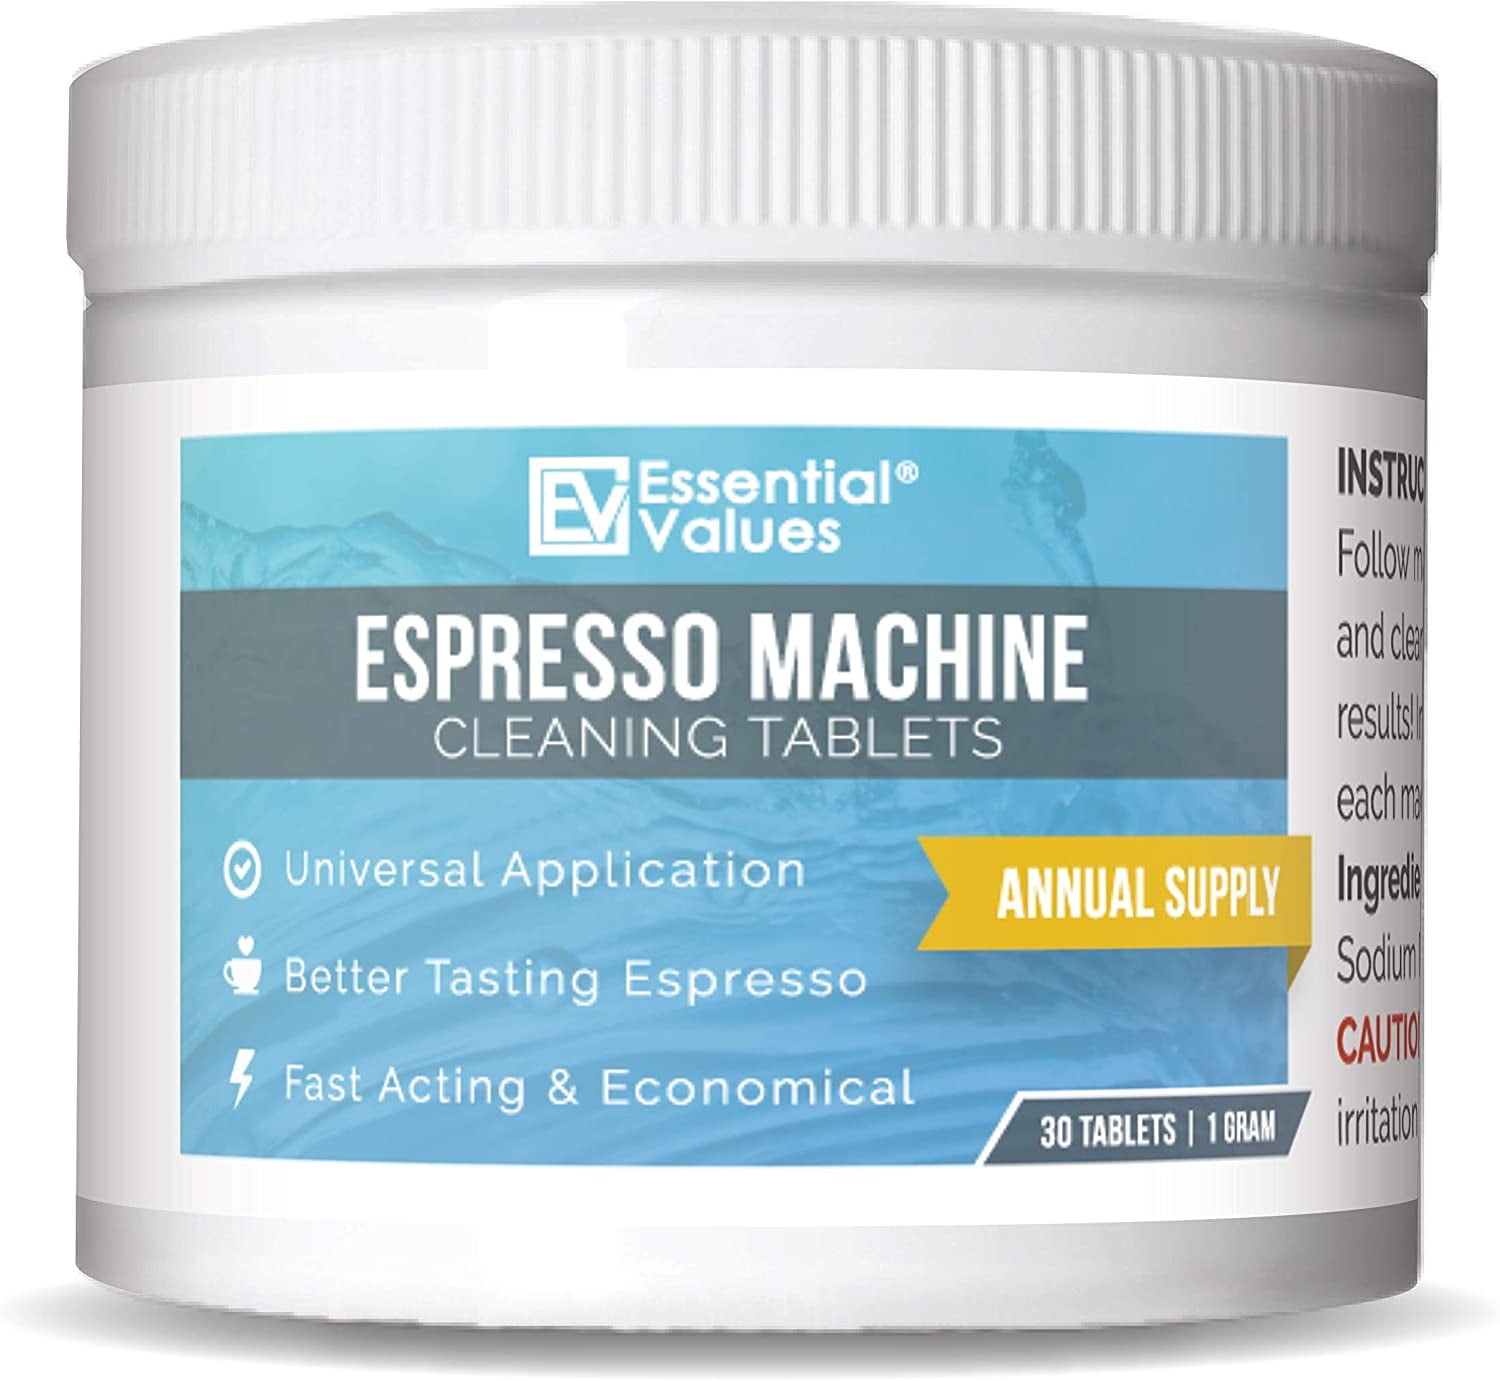  Espresso Machine Cleaning Tablets - Coffee Maker Cleaning  Tablets - Pack of of 4-32 Tablets- Compatible with Breville - Jura - Miele  - Keurig - Krups - and More : Home & Kitchen